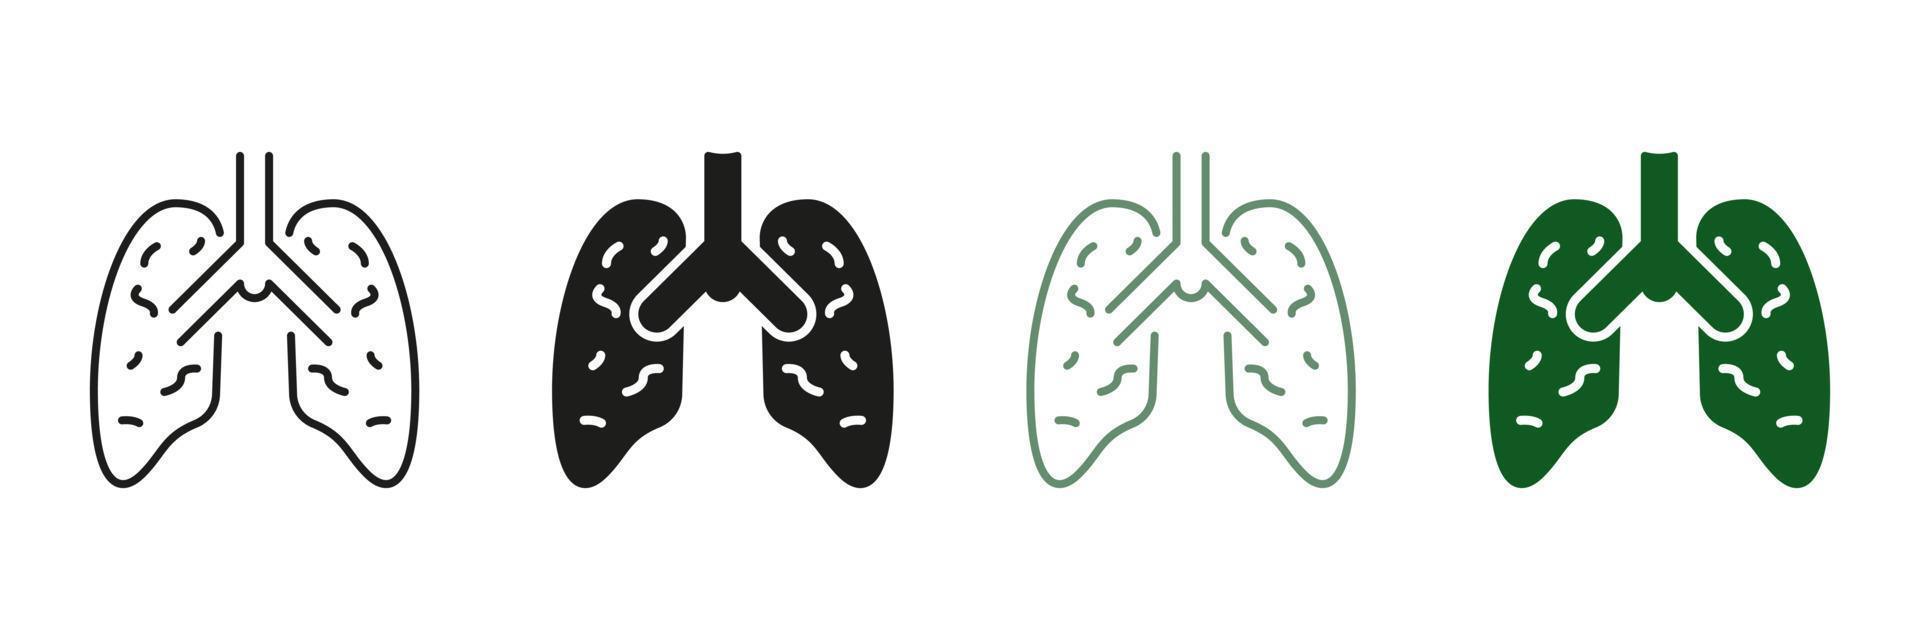 Pneumonia, Asthma, Viral Disease. Pneumonia Lungs Sign. Inflammatory Condition of Lungs Symbol Collection. Human Internal Organ Line and Silhouette Icon Set. Isolated Vector illustration.